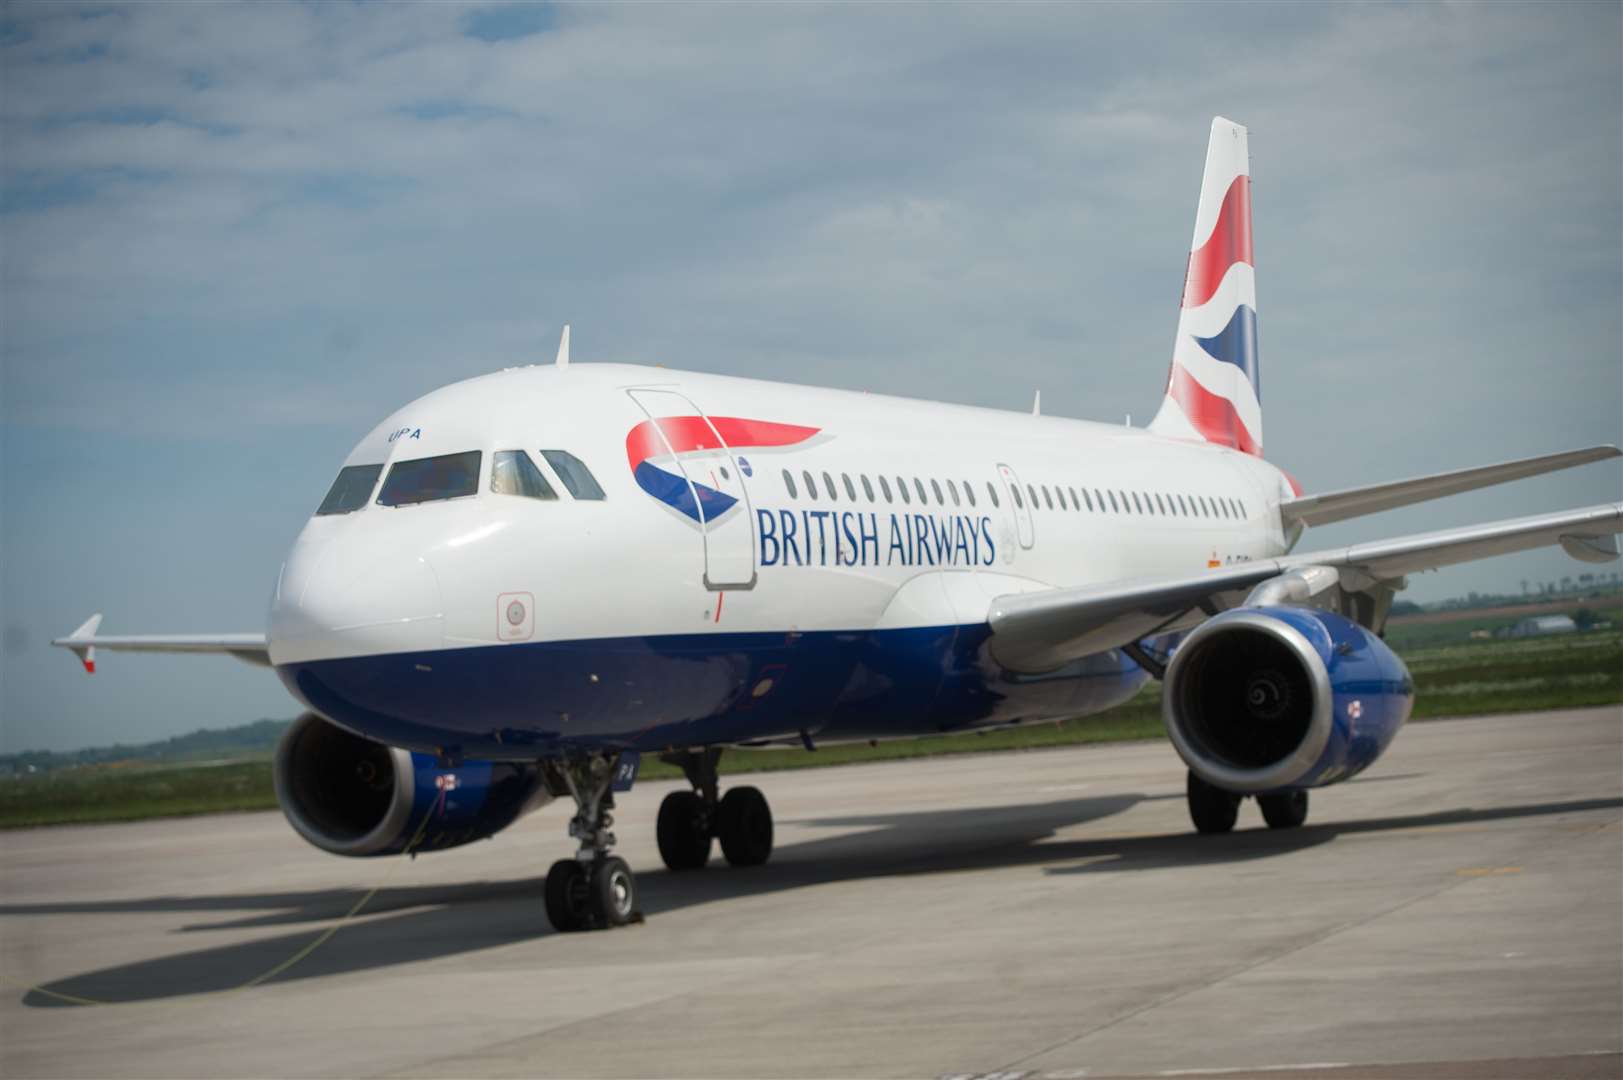 BA flights between Inverness and Heathrow have been grounded. Picture: Callum Mackay. Image No. 041241.